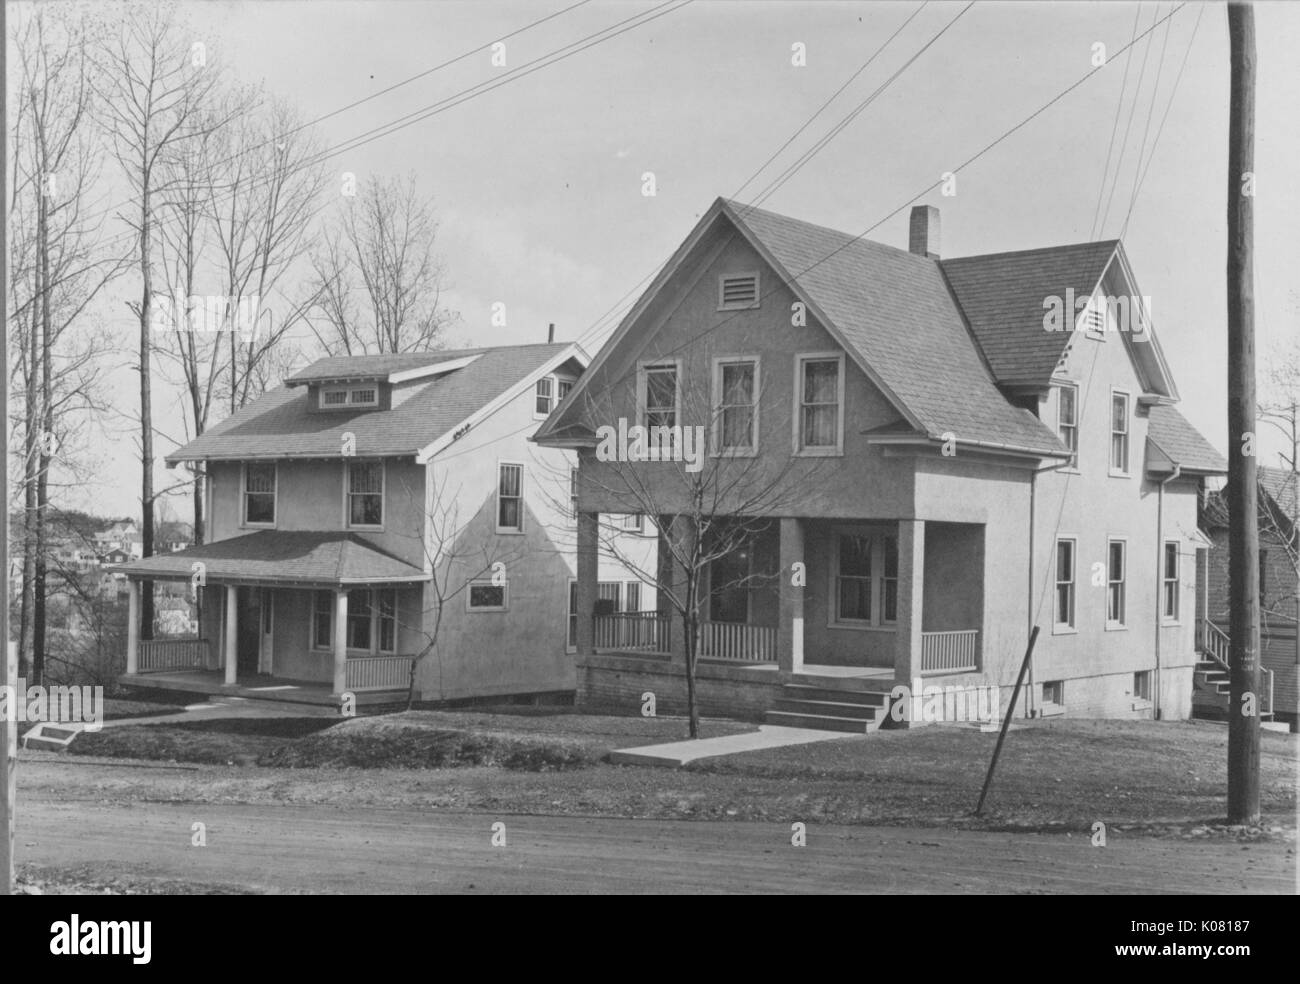 Photograph of two Roland Park homes in Baltimore, both two-story homes with spacious porches, located on a hill, neither made of brick, but with large Baltimore-styled windows, besides trees with no leaves, United States, 1920. This image is from a series documenting the construction and sale of homes in the Roland Park/Guilford neighborhood of Baltimore, a streetcar suburb and one of the first planned communities in the United States. Stock Photo